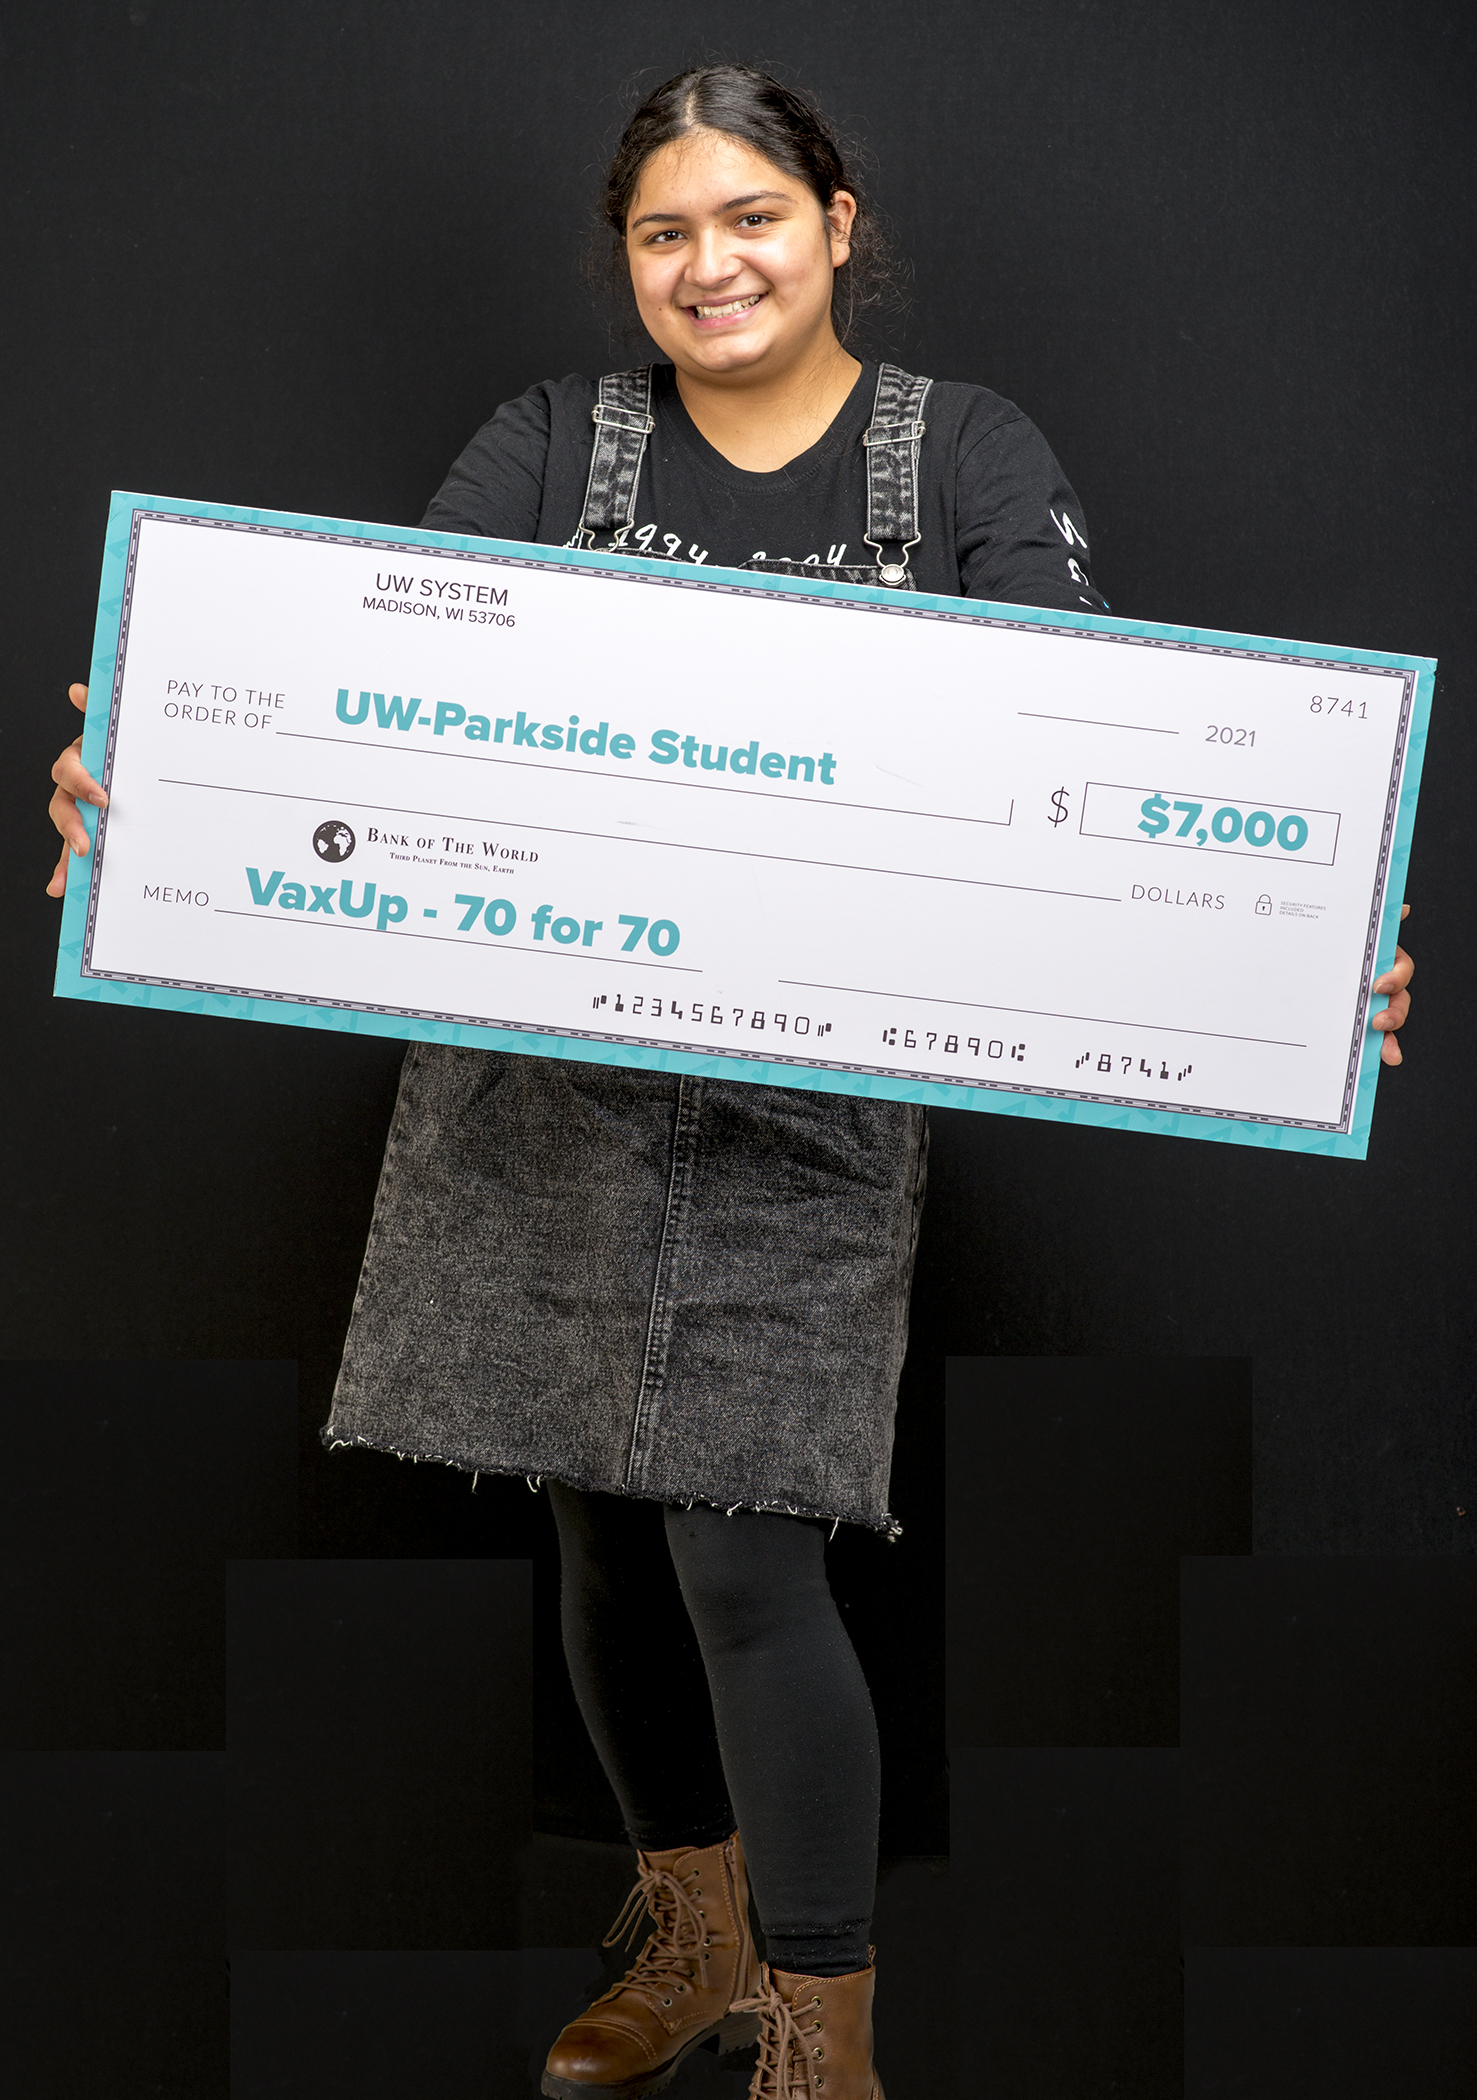 Briseyda Ocampo, UW-Parkside student and one of the three winners of a $7,000 Vax Up! Scholarship 